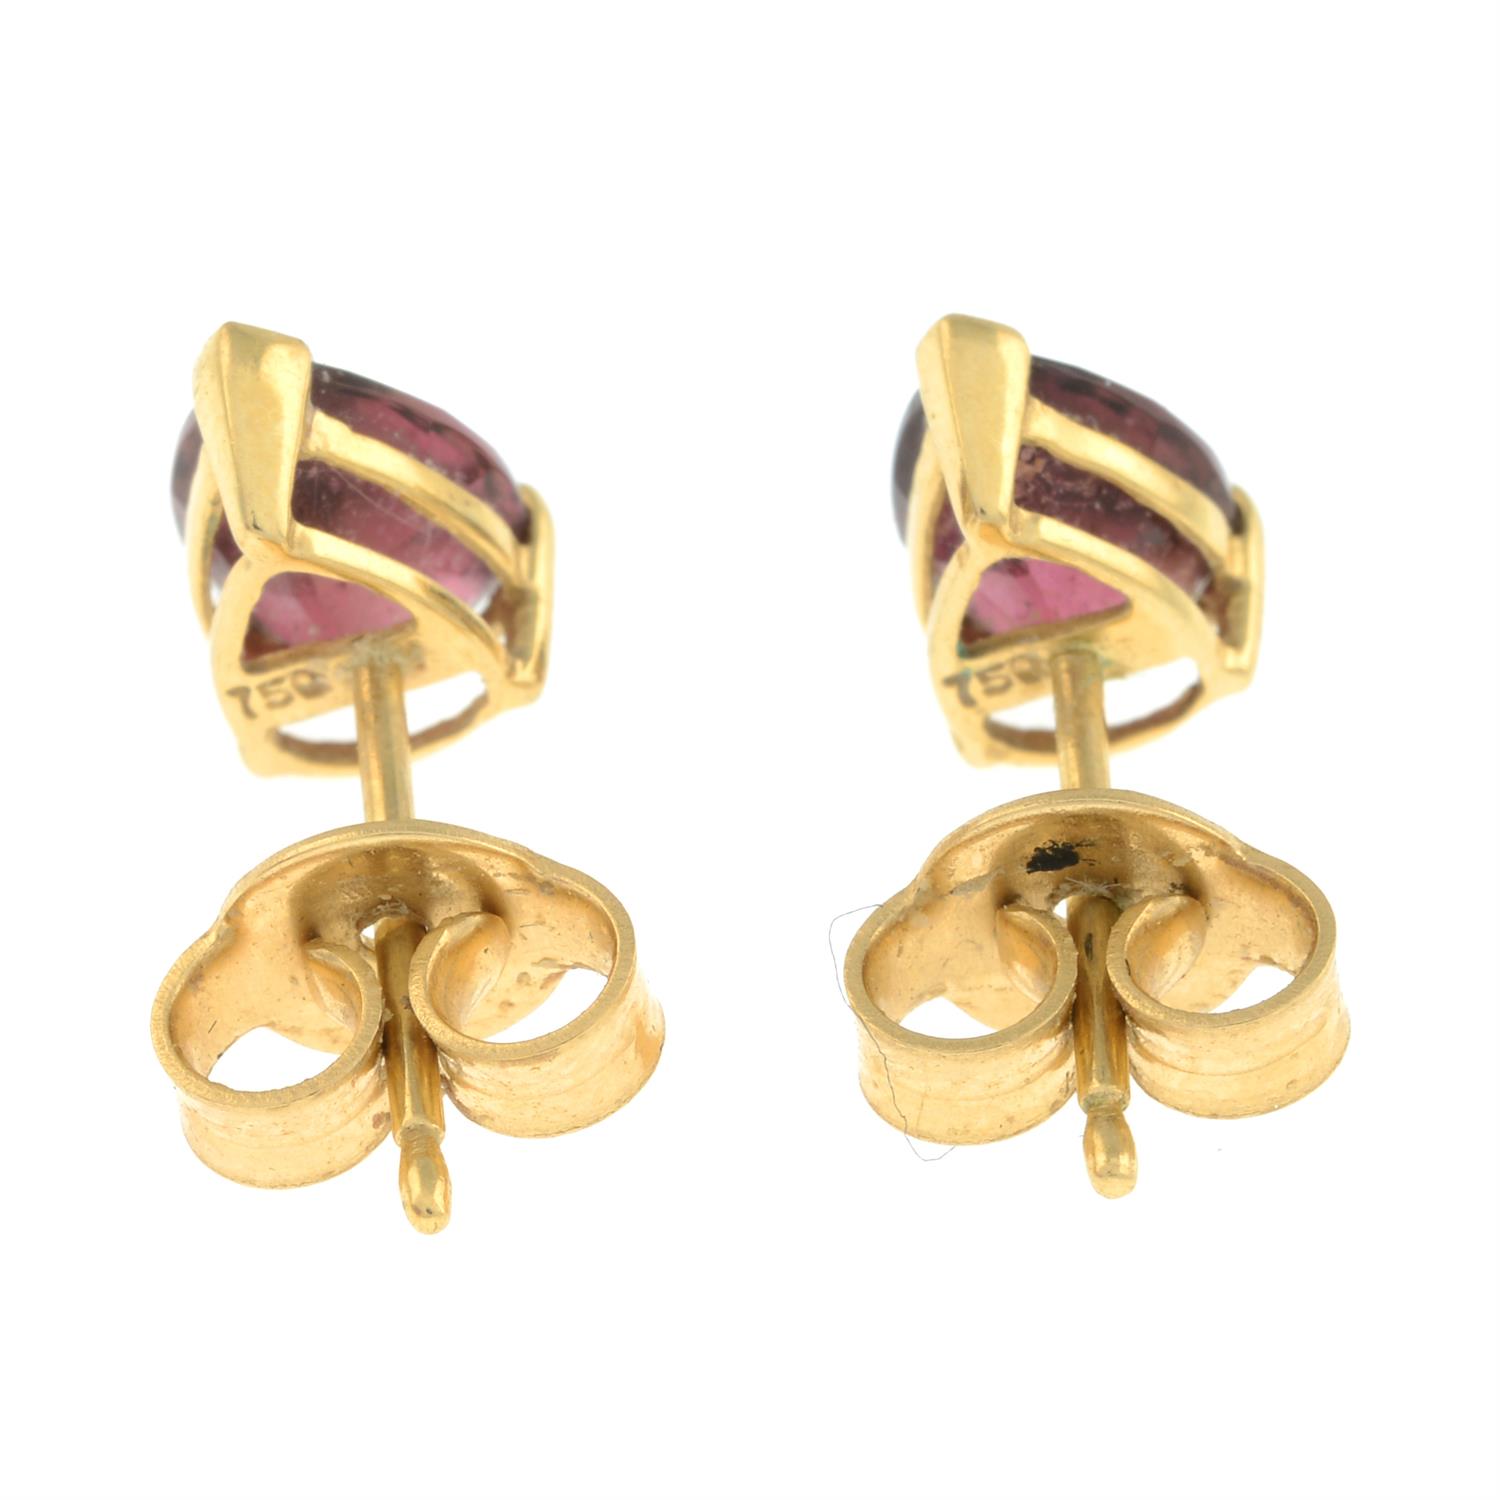 18ct gold pink tourmaline stud earrings - Image 2 of 2